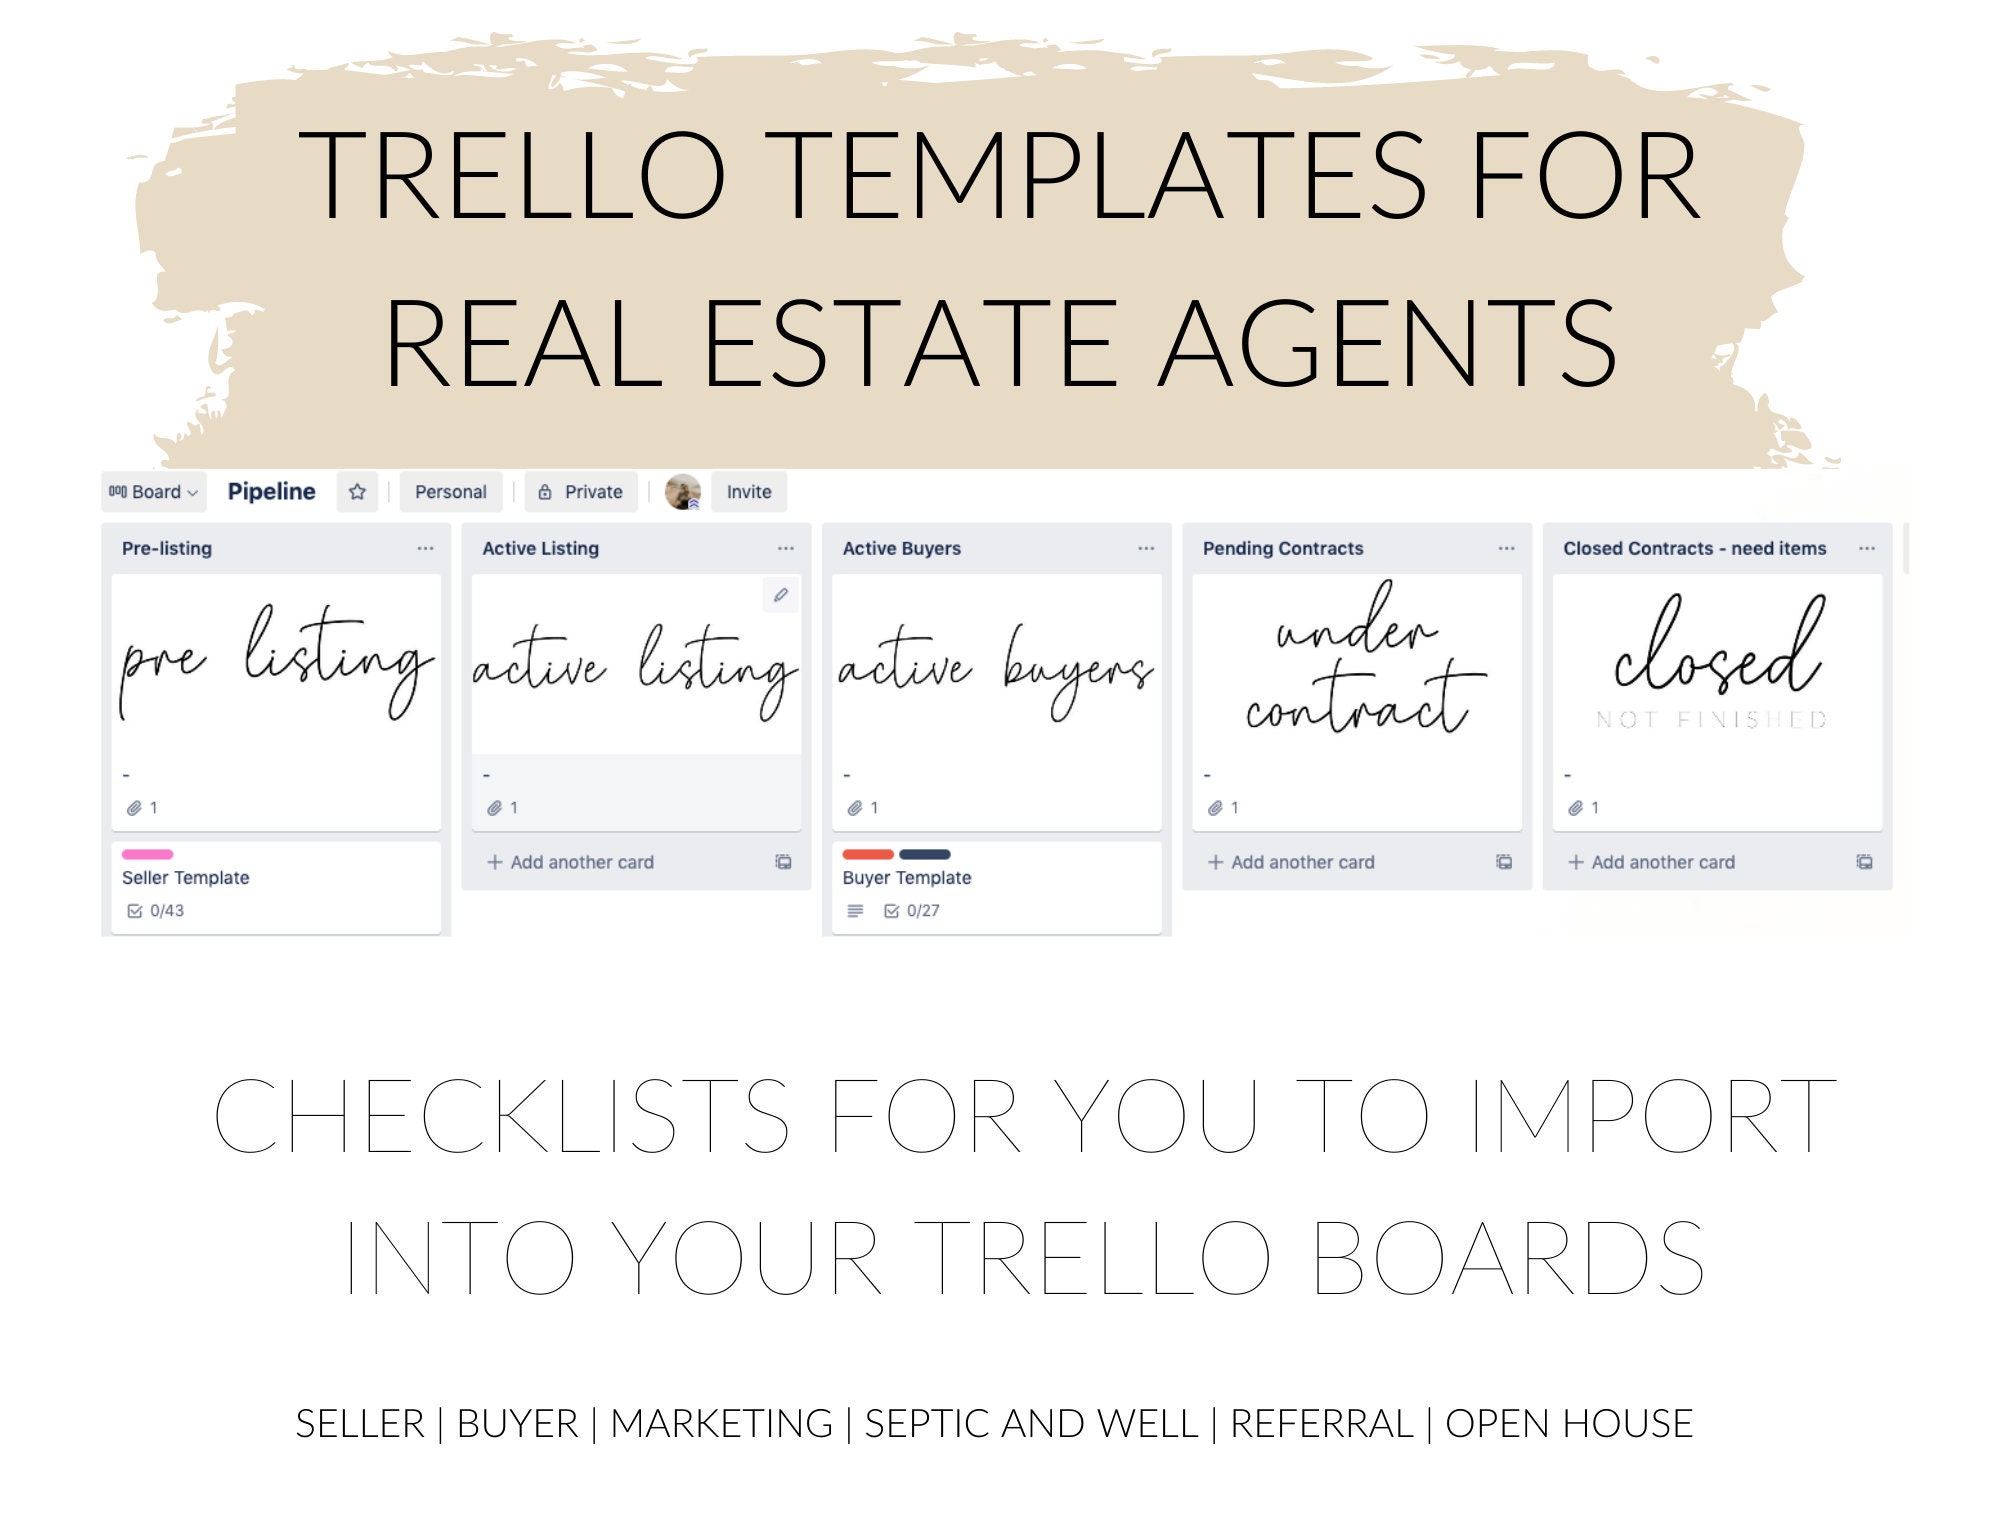 Best Trello Templates You Should Know About and How to Use Them